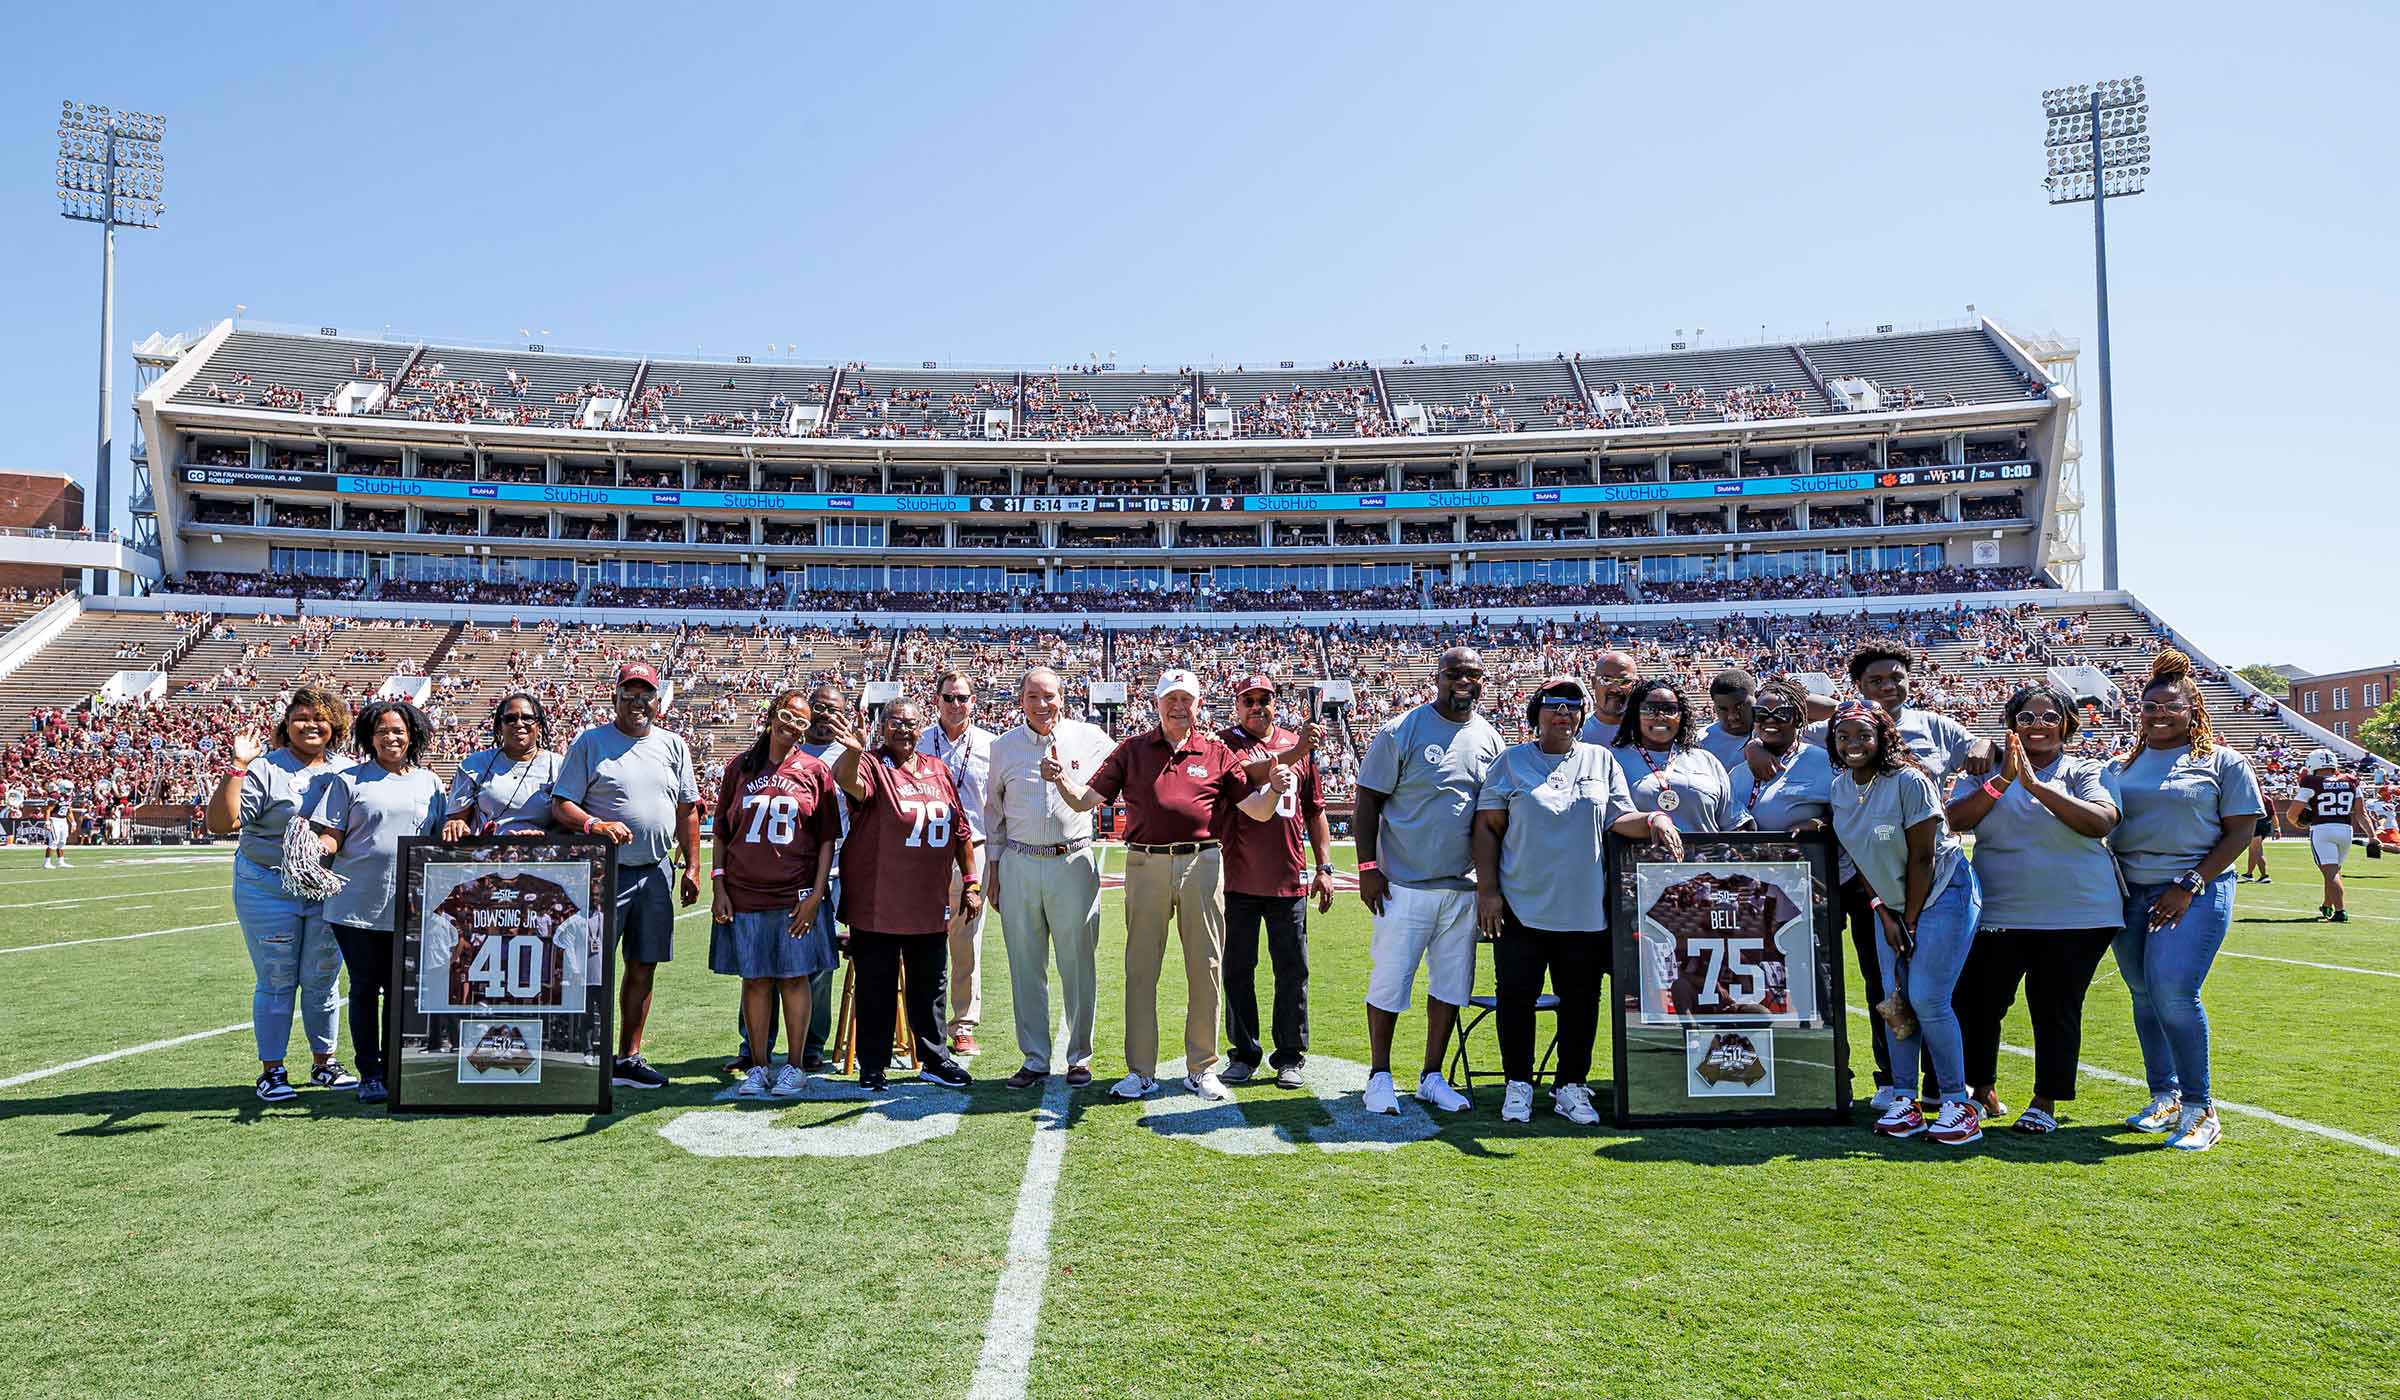 Group of people on football field smiling and waving with framed jerseys